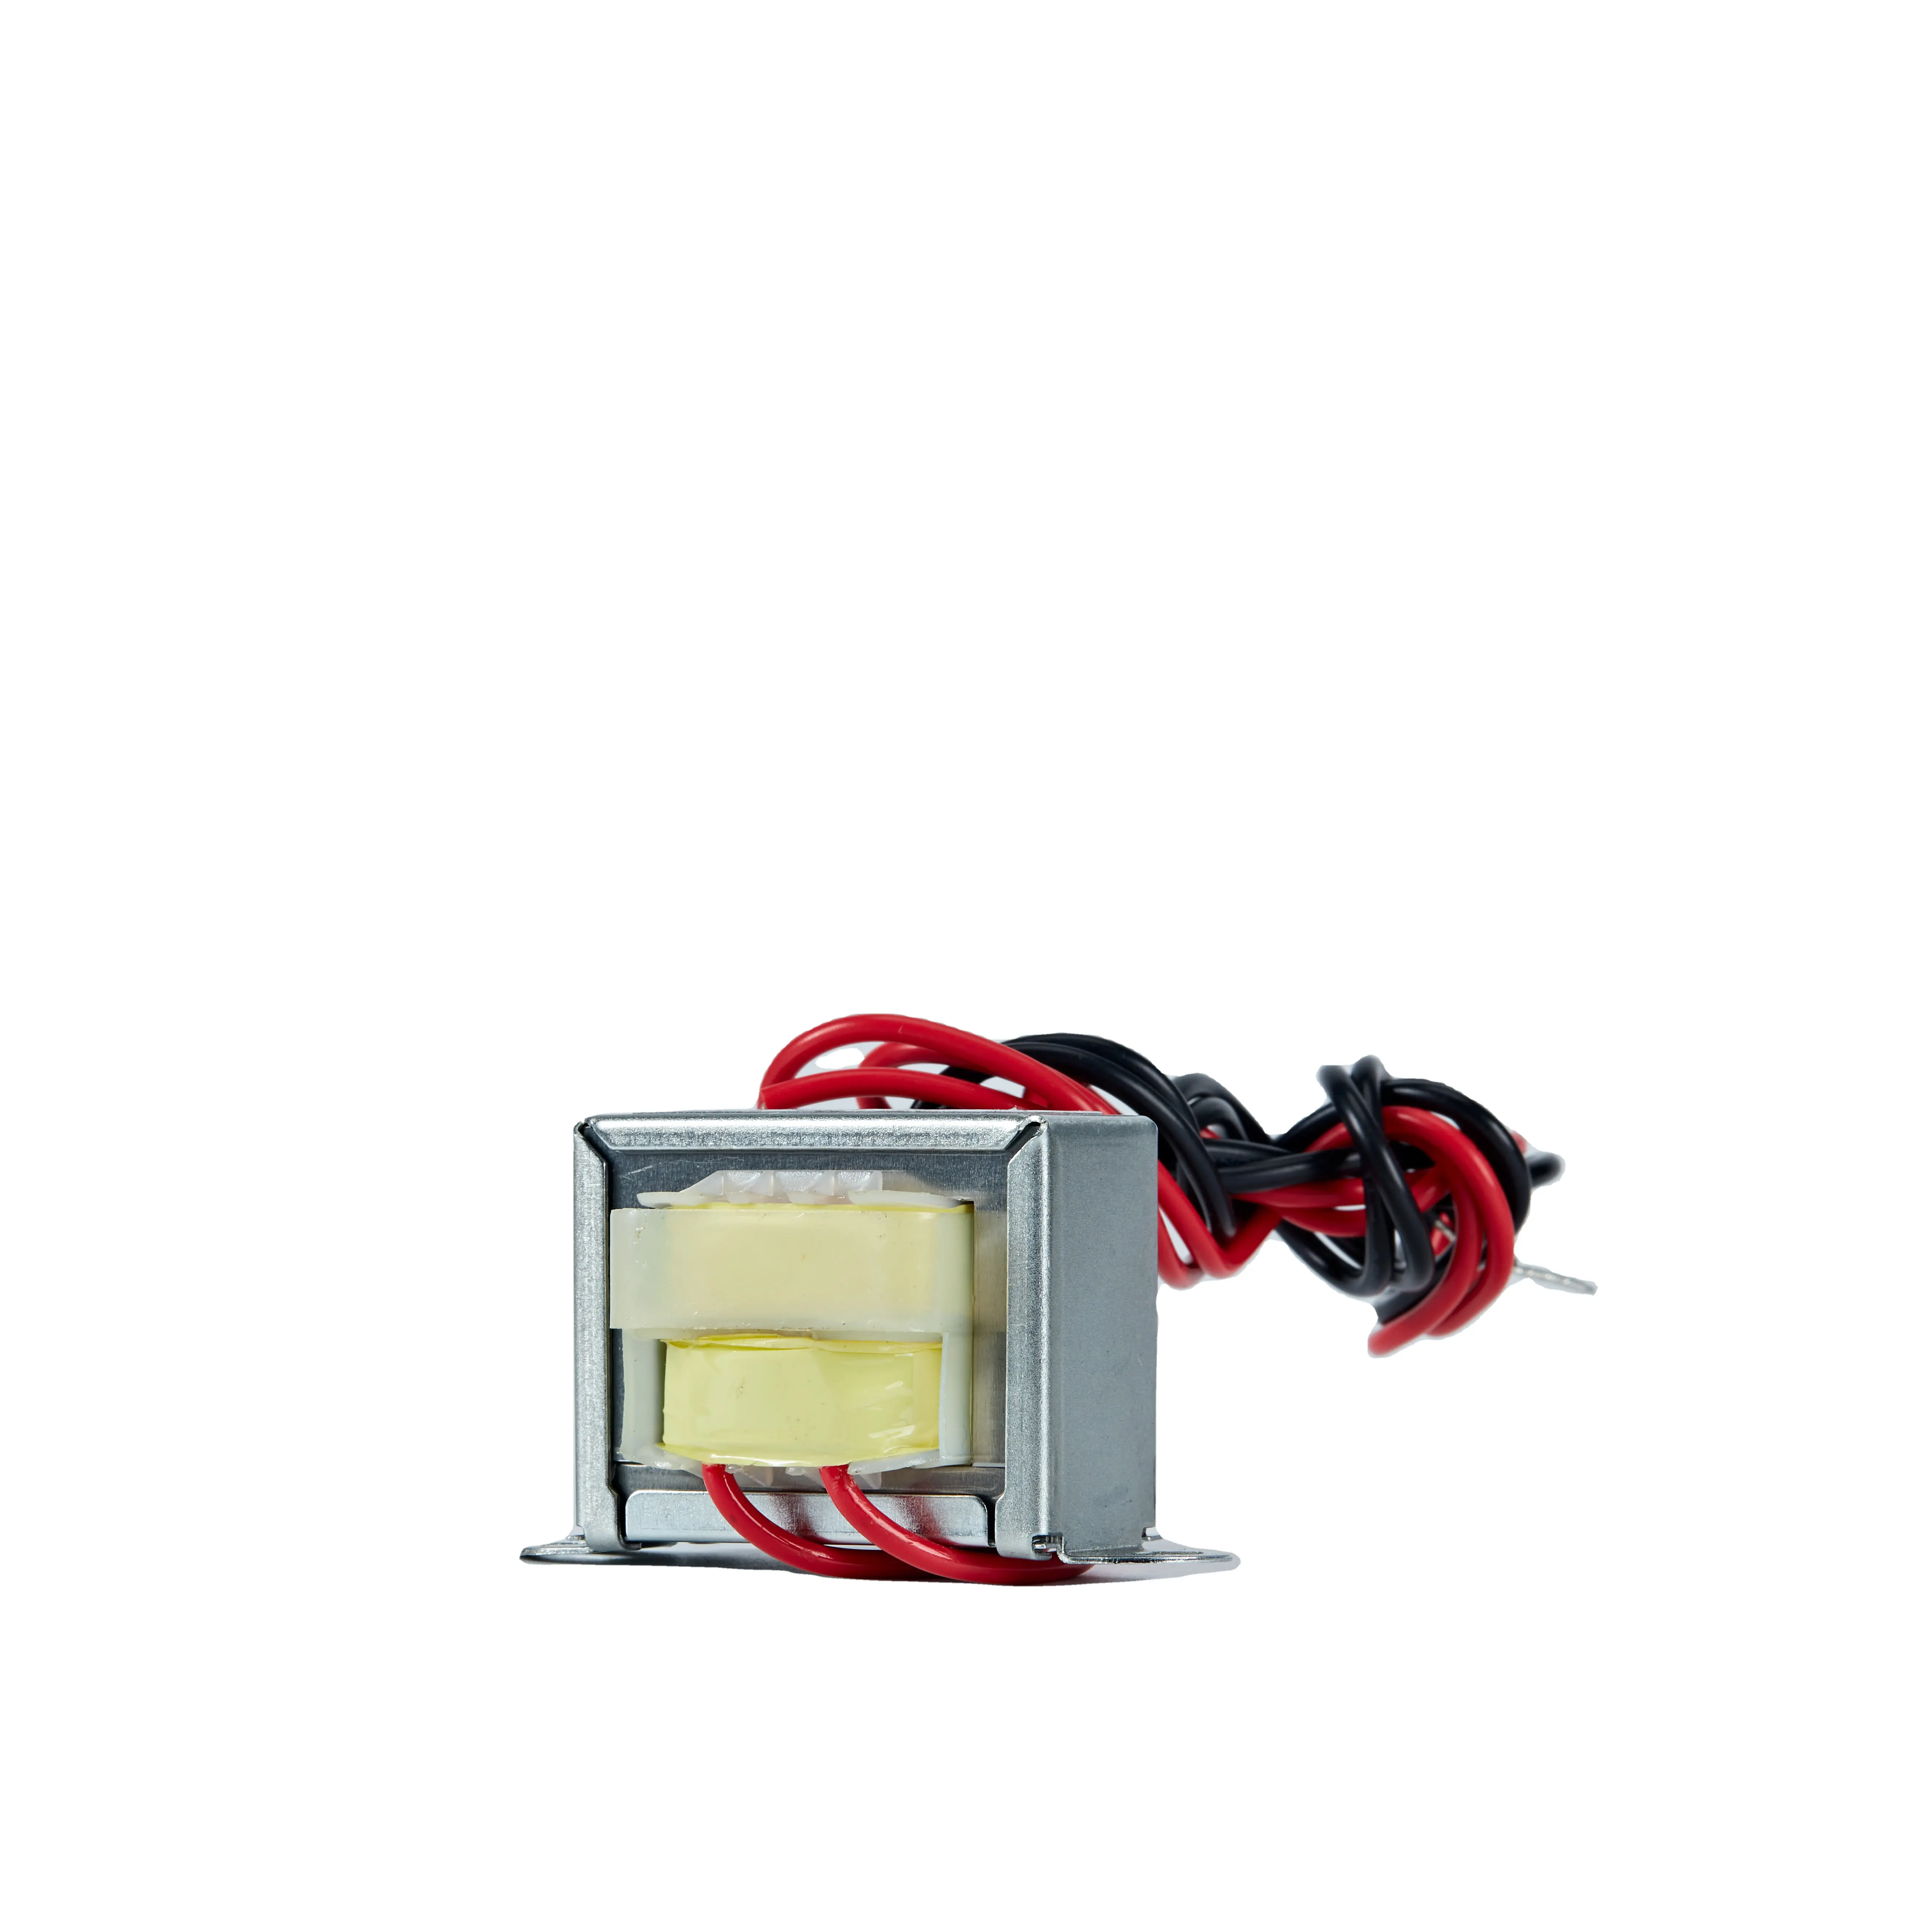 AC Transformer 380V 12V Step Down Voltage Transformer with EI Lamination Transformer with Electric Lead Wire